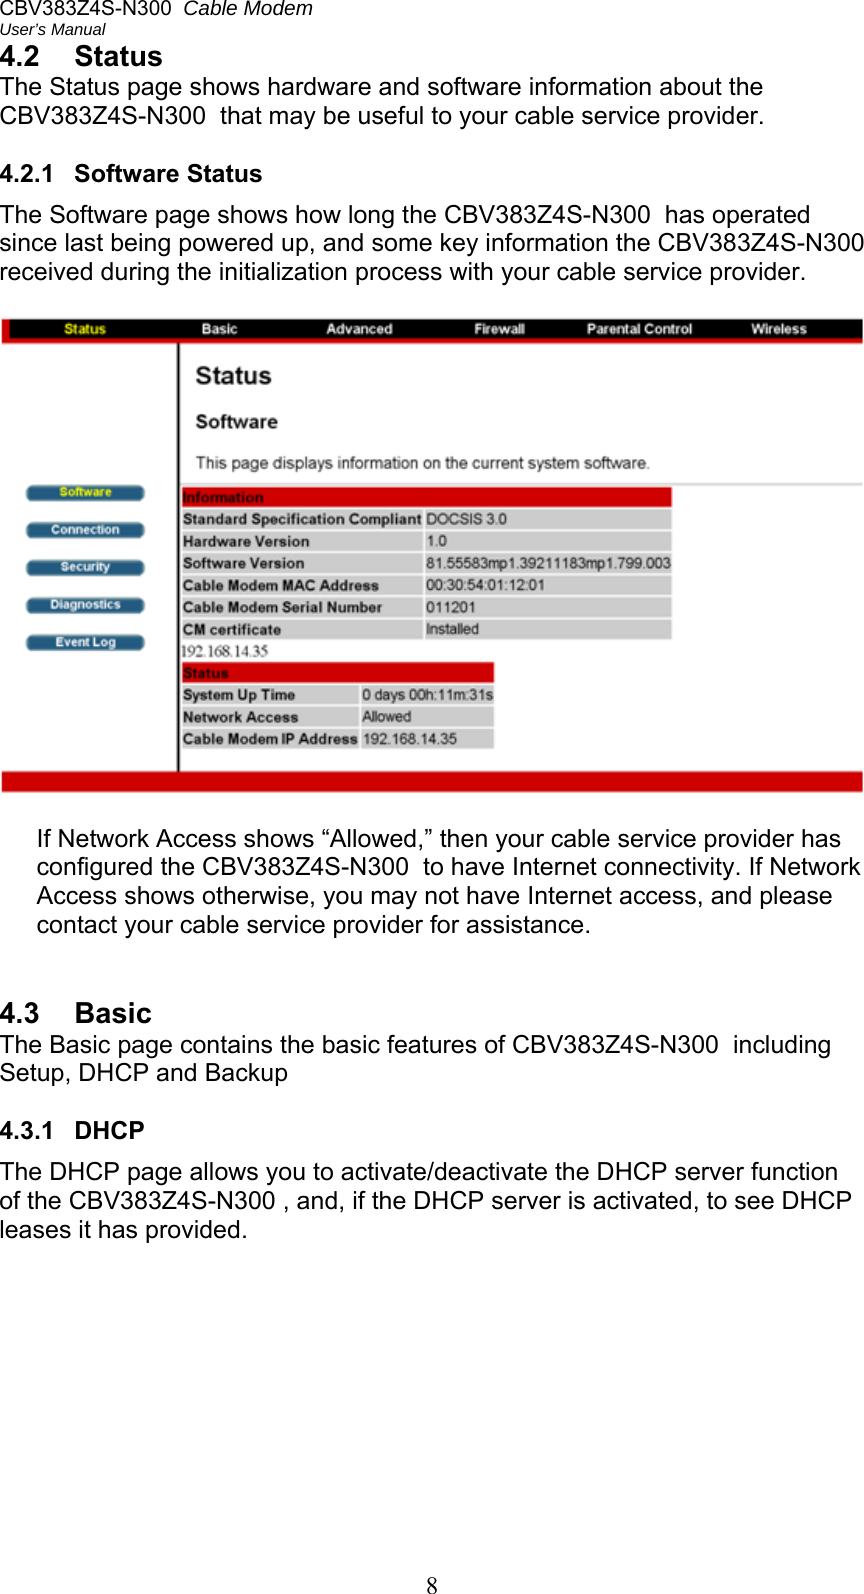 CBV383Z4S-N300  Cable Modem  User’s Manual 8 4.2  Status The Status page shows hardware and software information about the CBV383Z4S-N300  that may be useful to your cable service provider.  4.2.1  Software Status The Software page shows how long the CBV383Z4S-N300  has operated since last being powered up, and some key information the CBV383Z4S-N300  received during the initialization process with your cable service provider.    If Network Access shows “Allowed,” then your cable service provider has configured the CBV383Z4S-N300  to have Internet connectivity. If Network Access shows otherwise, you may not have Internet access, and please contact your cable service provider for assistance.   4.3  Basic The Basic page contains the basic features of CBV383Z4S-N300  including Setup, DHCP and Backup  4.3.1  DHCP The DHCP page allows you to activate/deactivate the DHCP server function of the CBV383Z4S-N300 , and, if the DHCP server is activated, to see DHCP leases it has provided. 